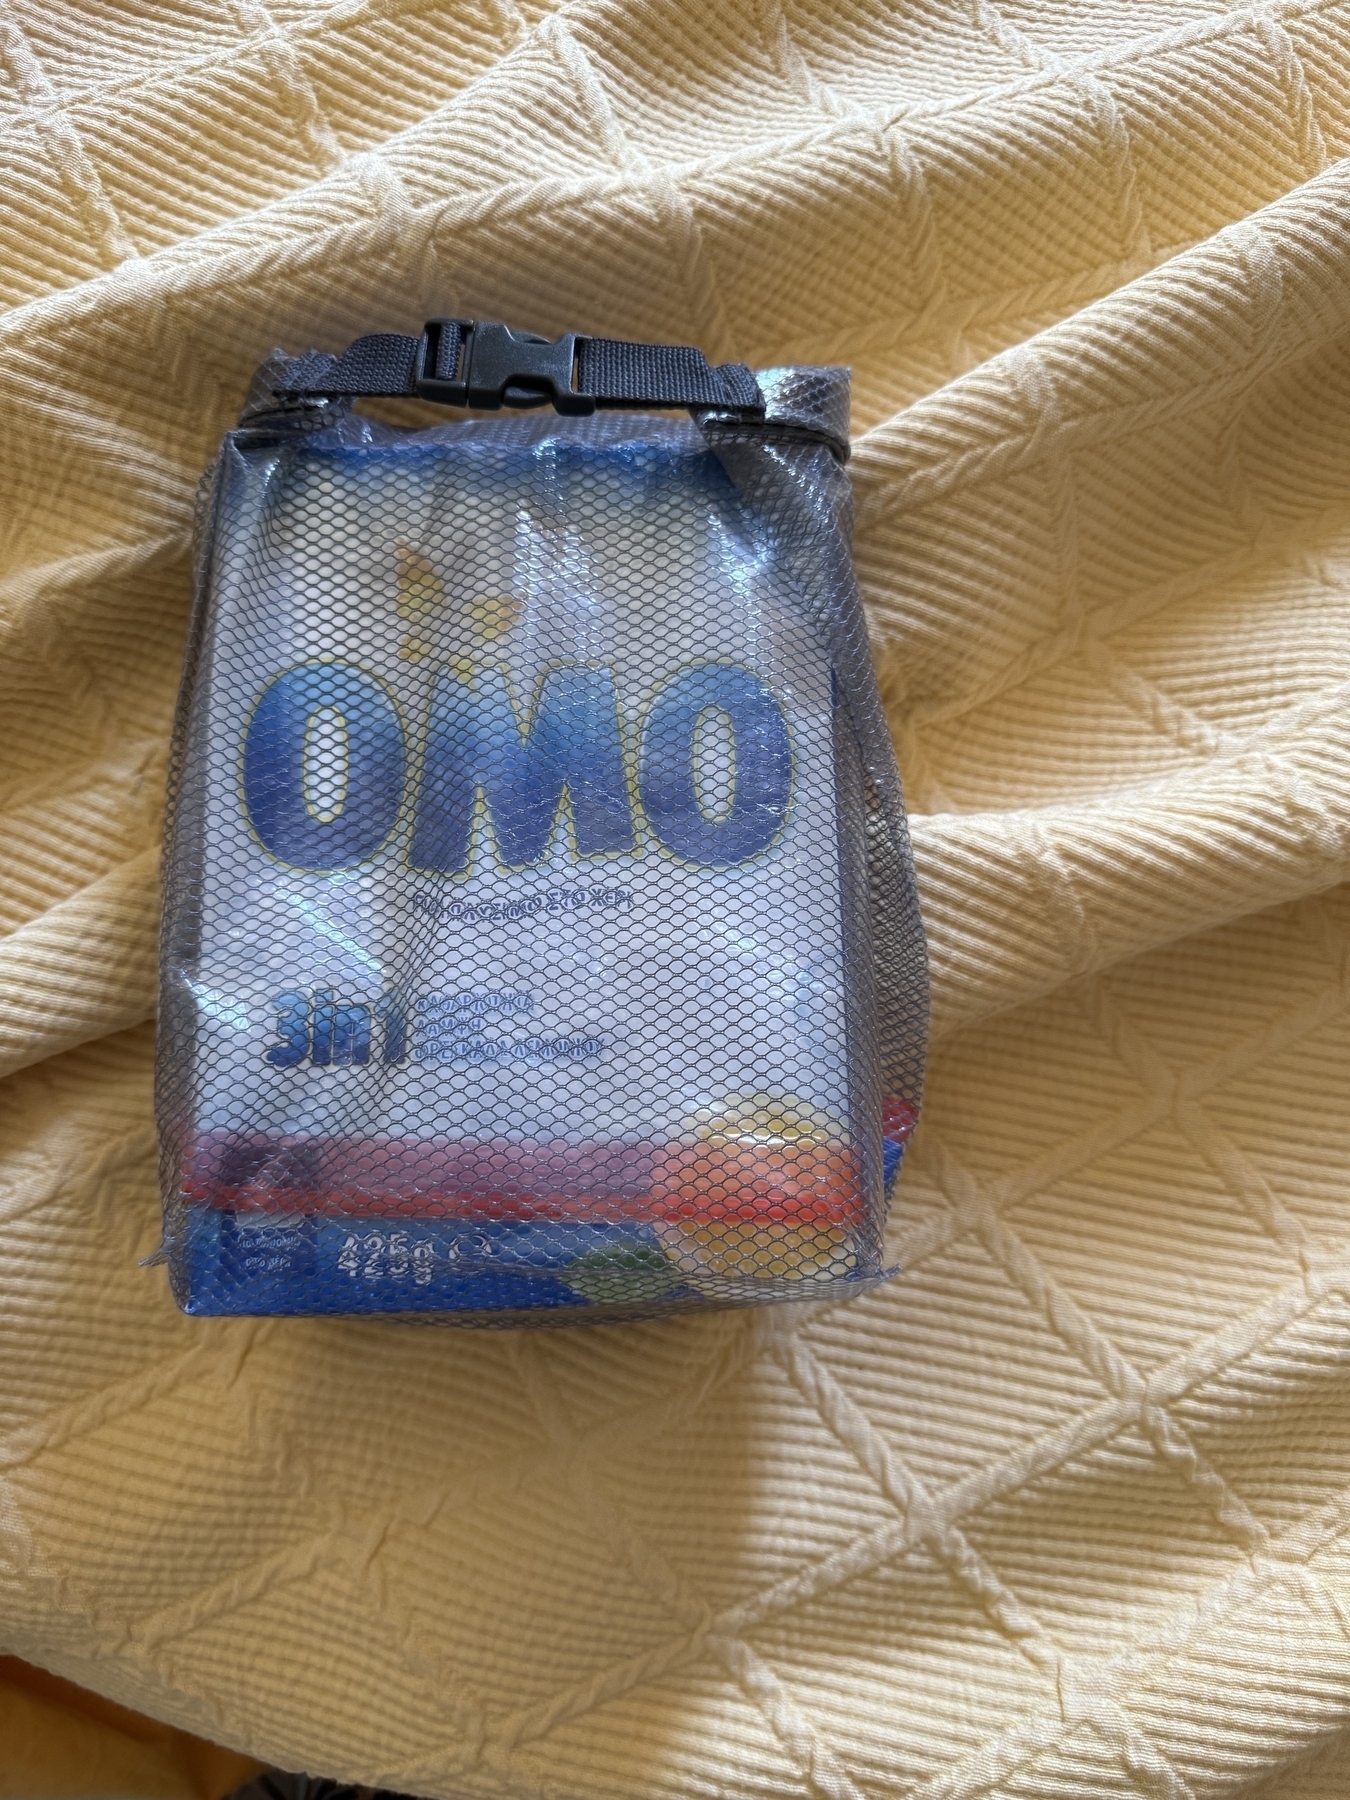 A box of "OMO" laundry detergent in a dry bag